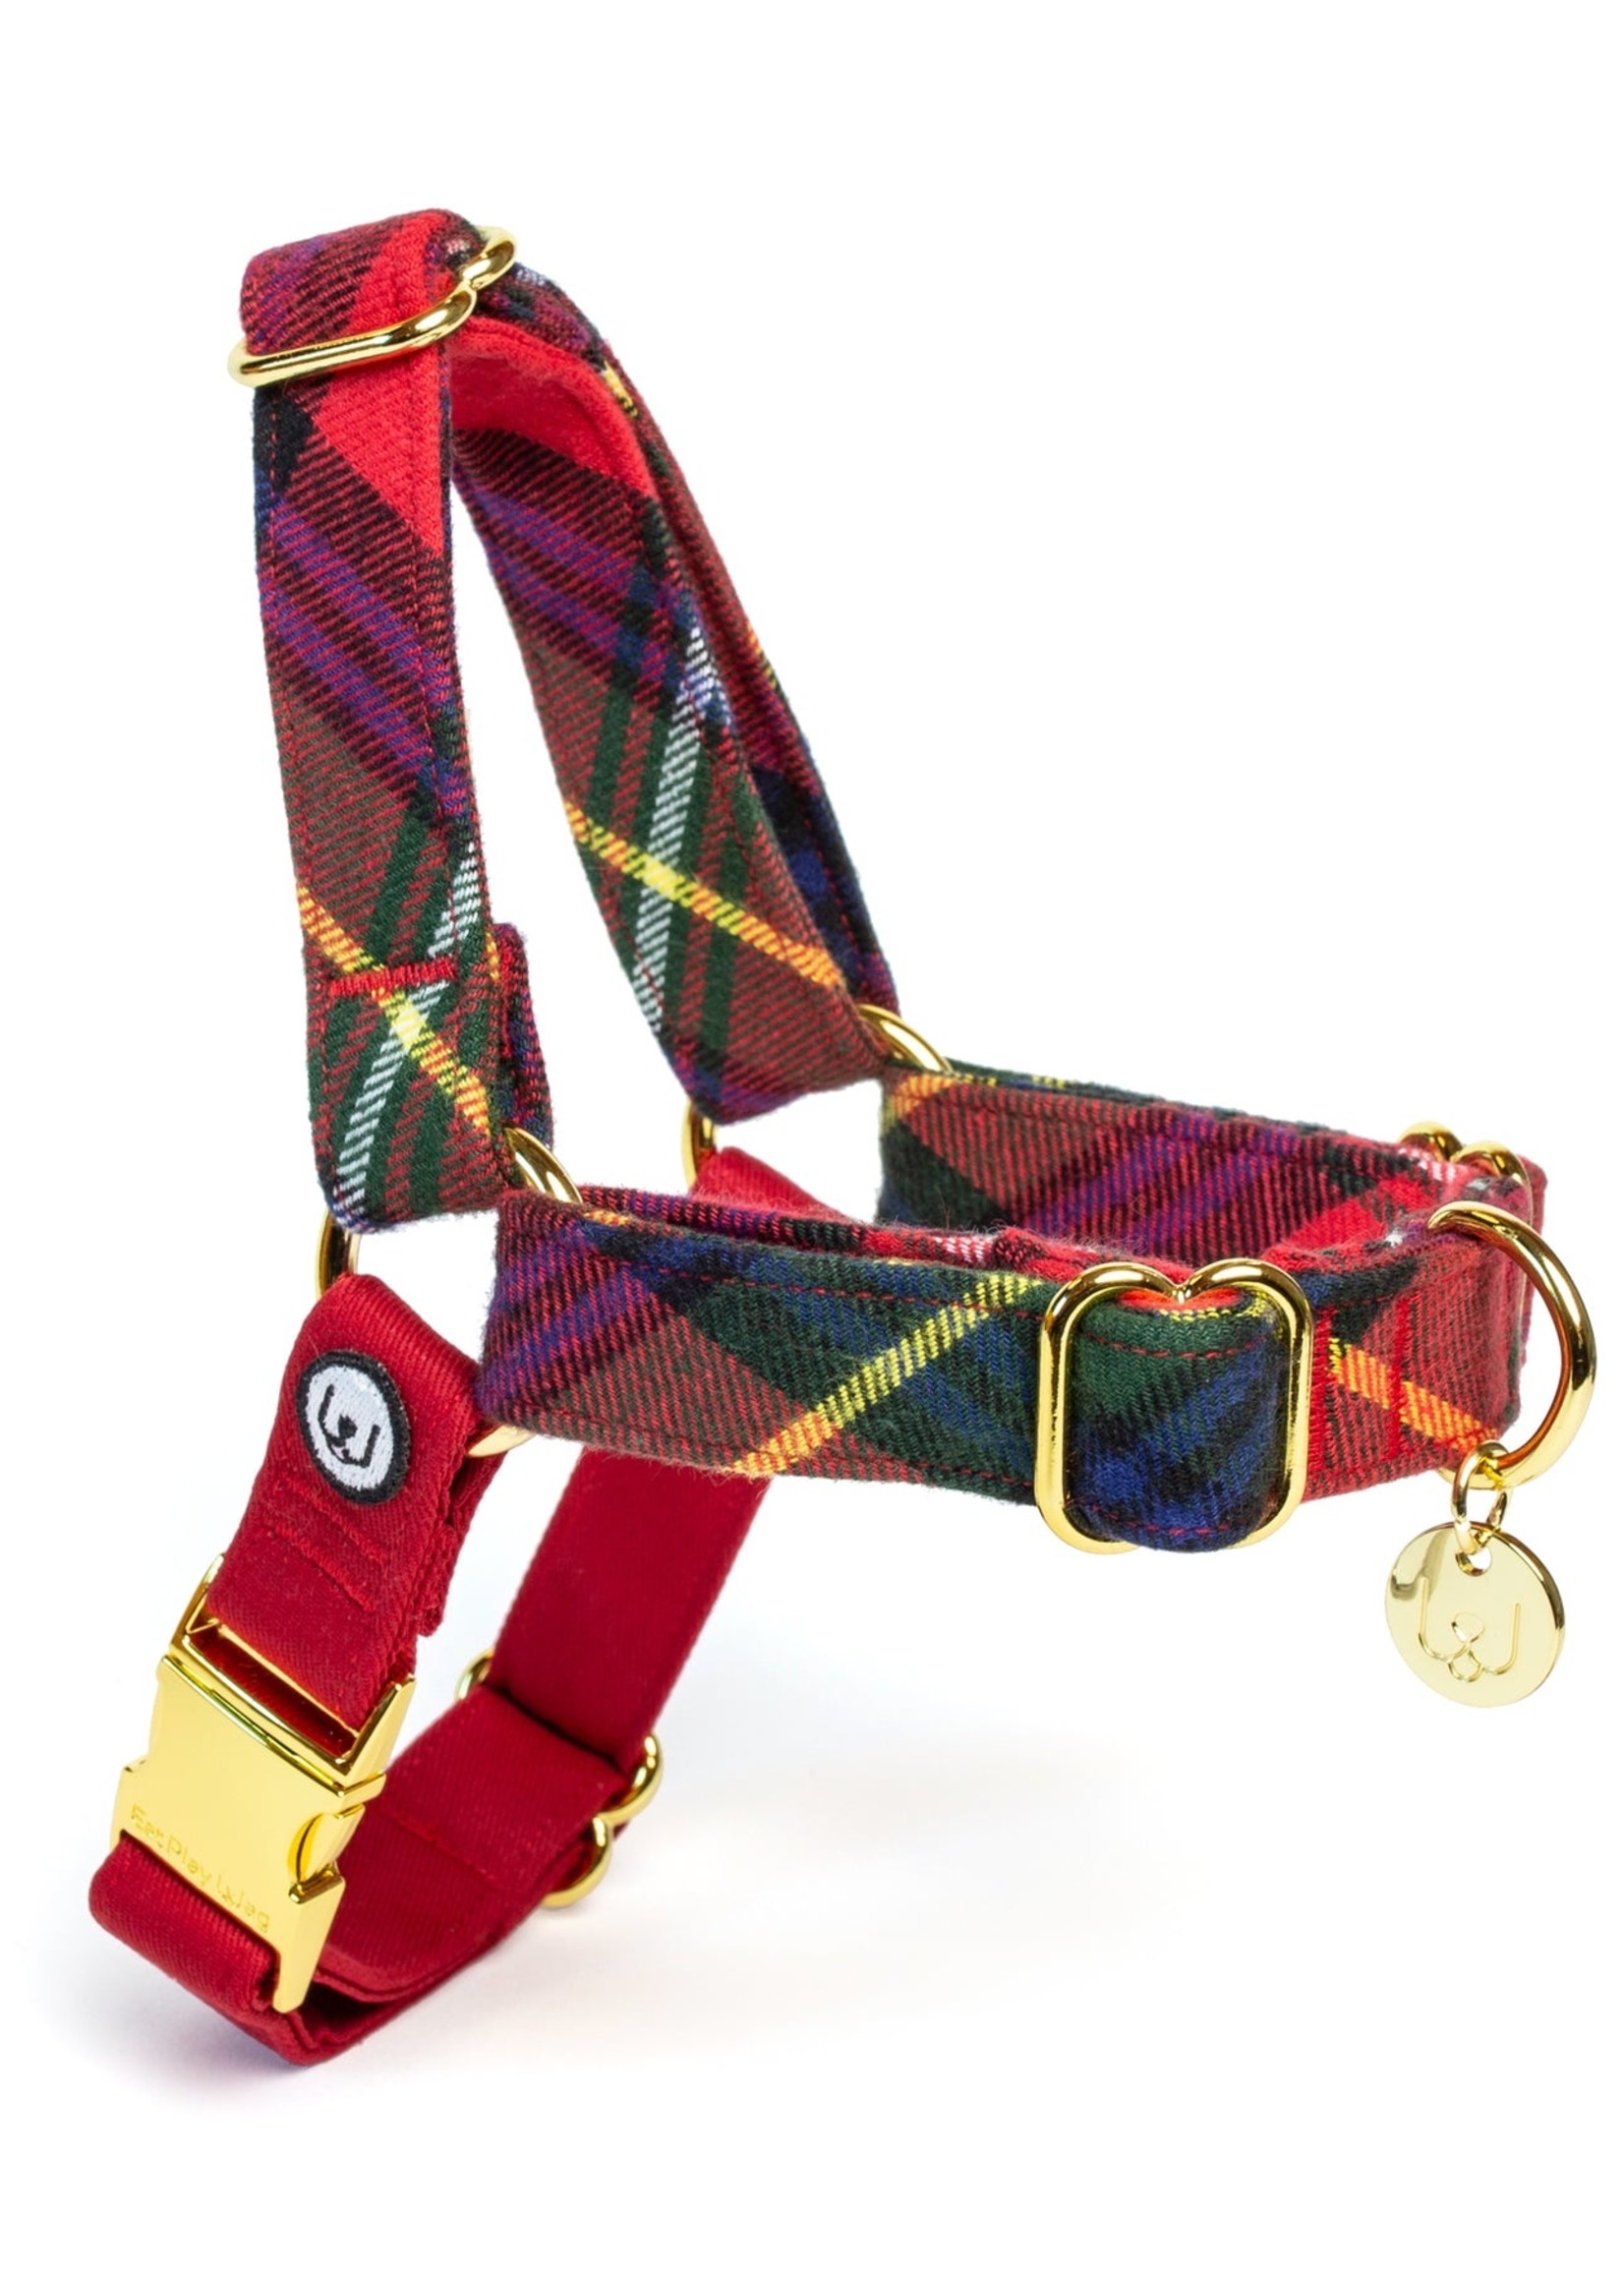 Eat Play Wag Eat Play Wag - Fireside No-Pull Harness